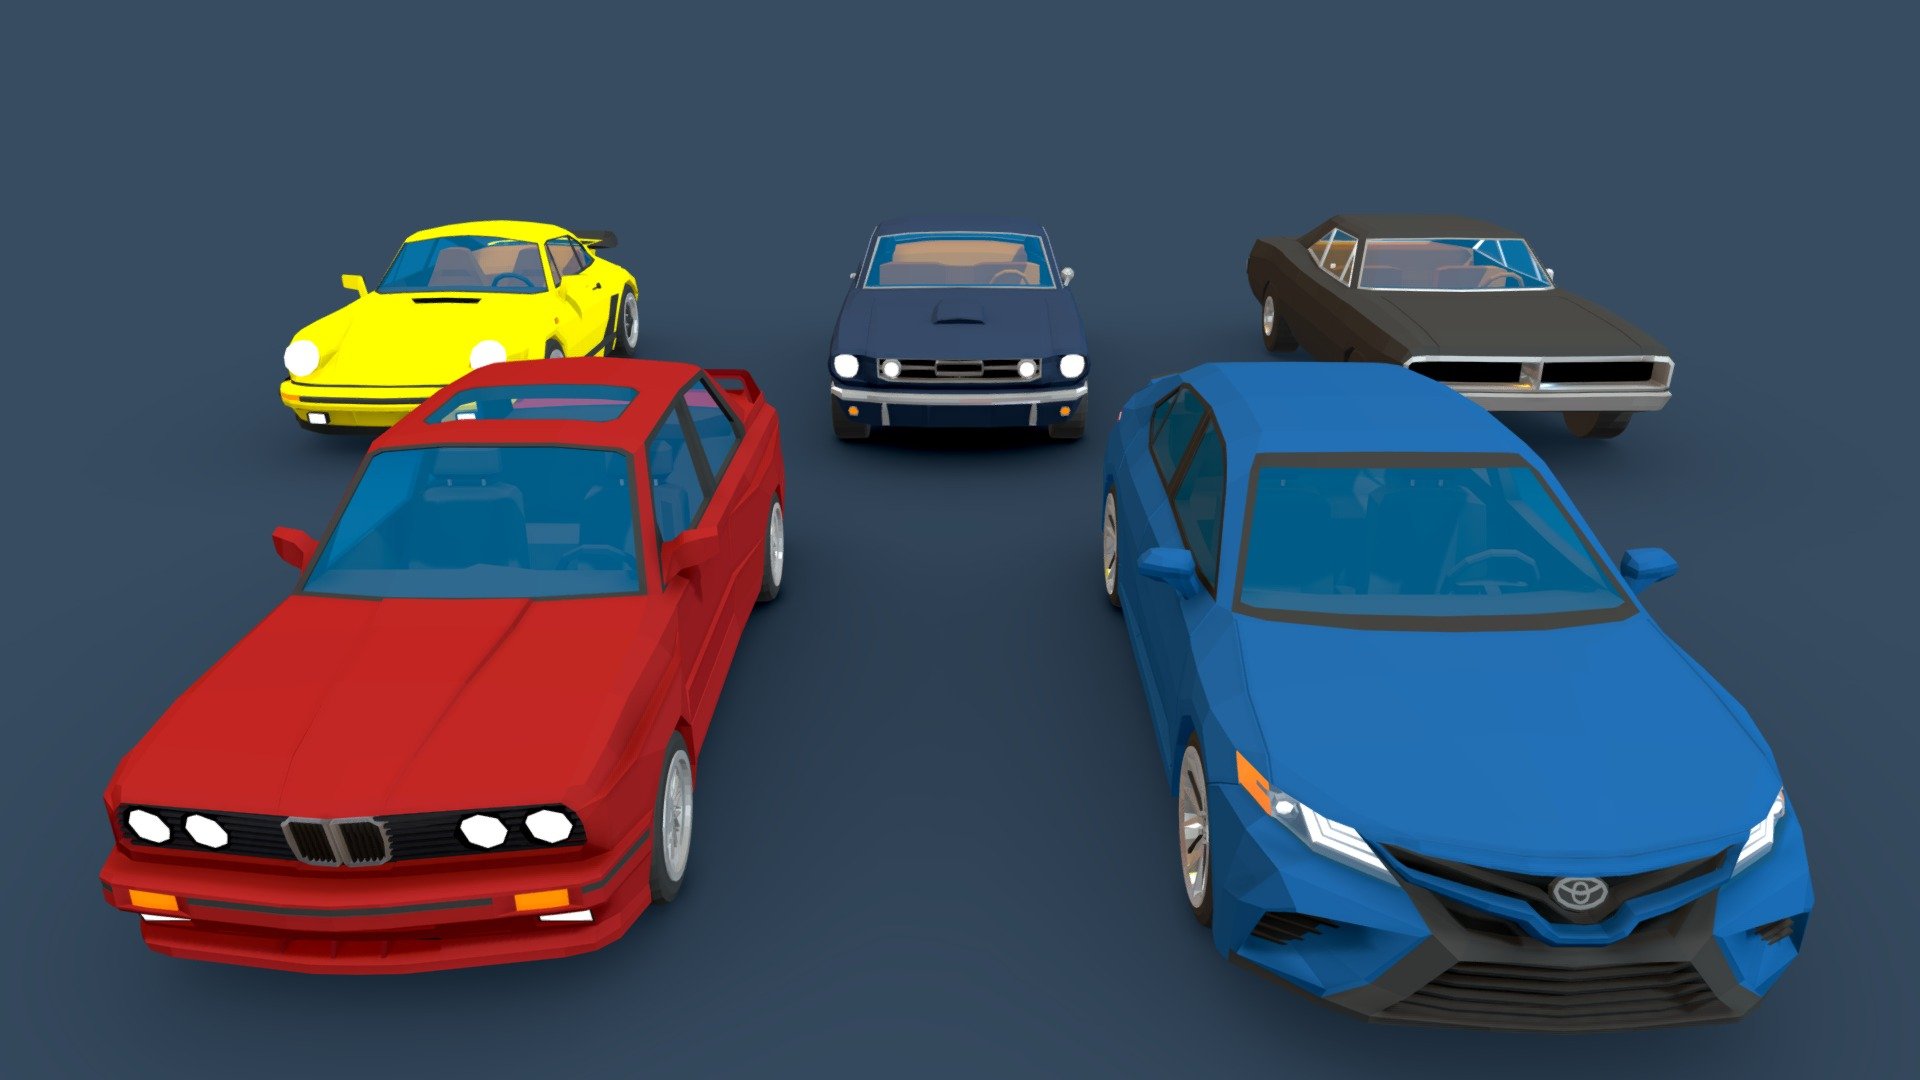 pack of 5 low poly cars for your games and projects.


Toyota Camry 2016
Ford Mustang GT Fastback 1965
Porsche 911 Turbo 930 1975
Dodge Charger 1969 -BMW M3 E30

Each model has separate wheels and some low poly interior.
Blender file included - Lowpoly cars pack - Buy Royalty Free 3D model by Apokalips123 (@semarumov) 3d model